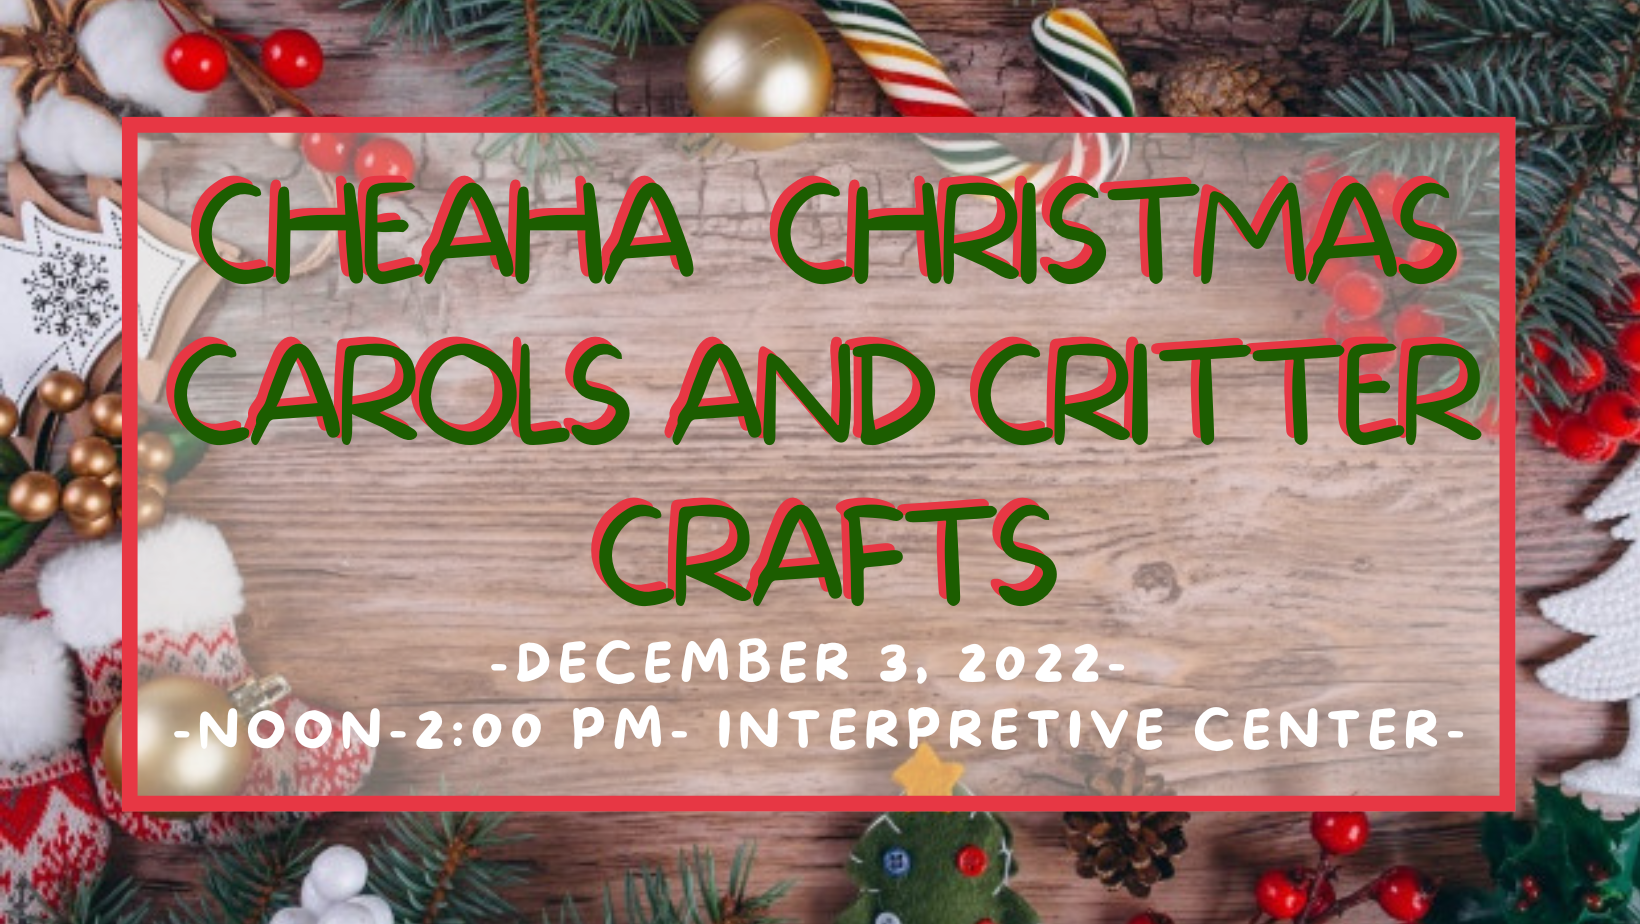 Cheaha Christmas Carols and Critter Crafts